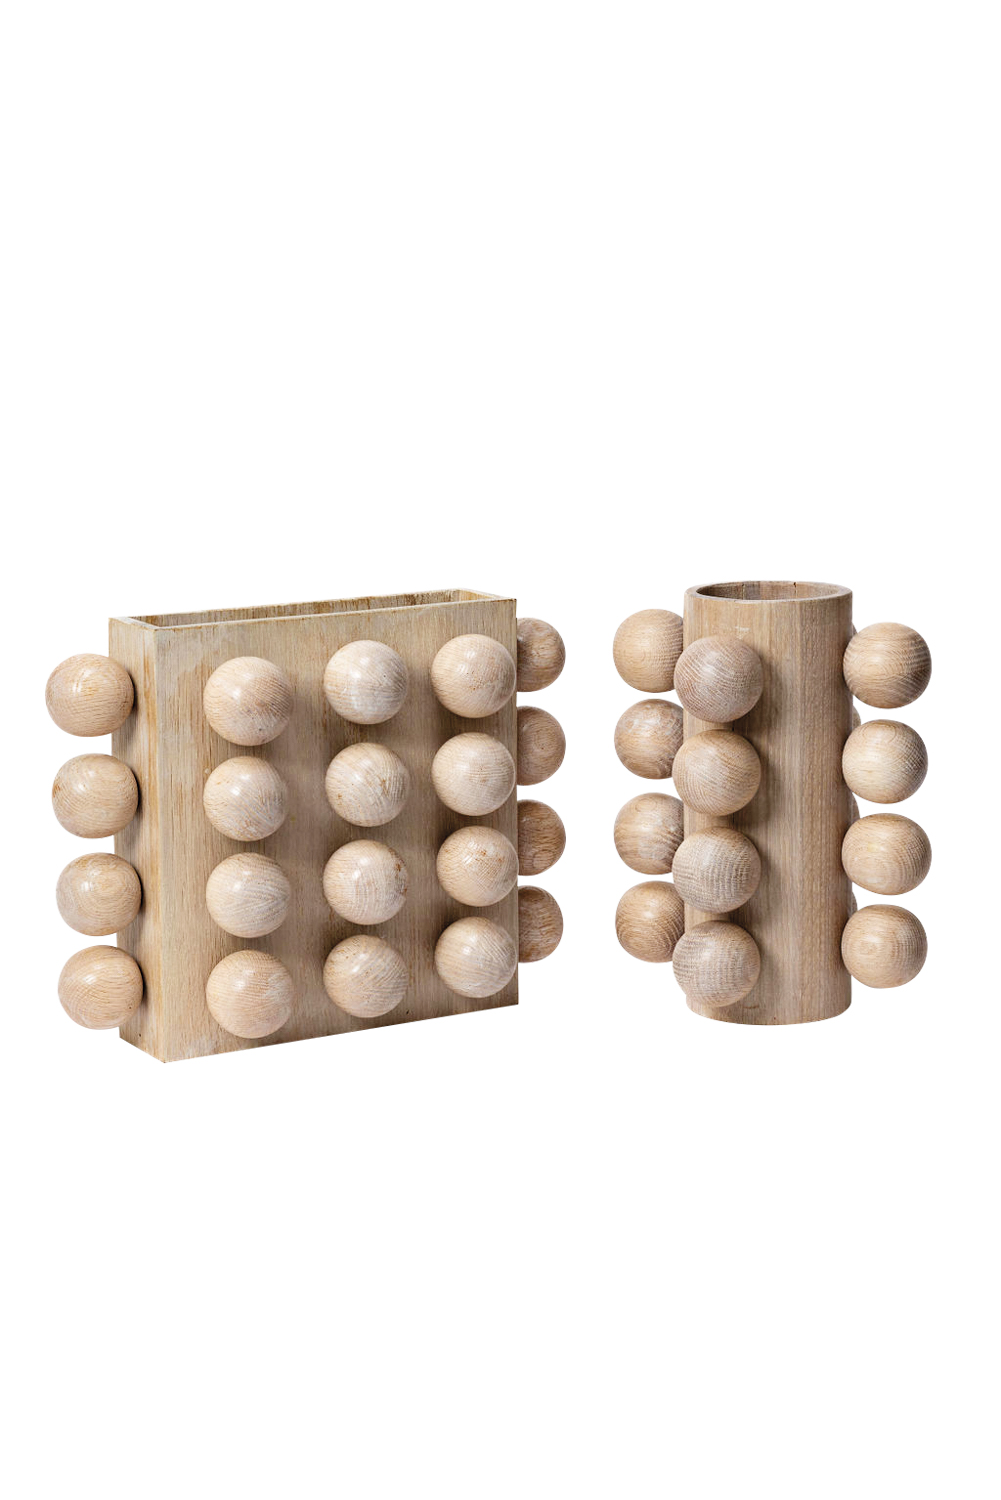 Rectangular and cylindrical wood vases decorated with wooden spheres.